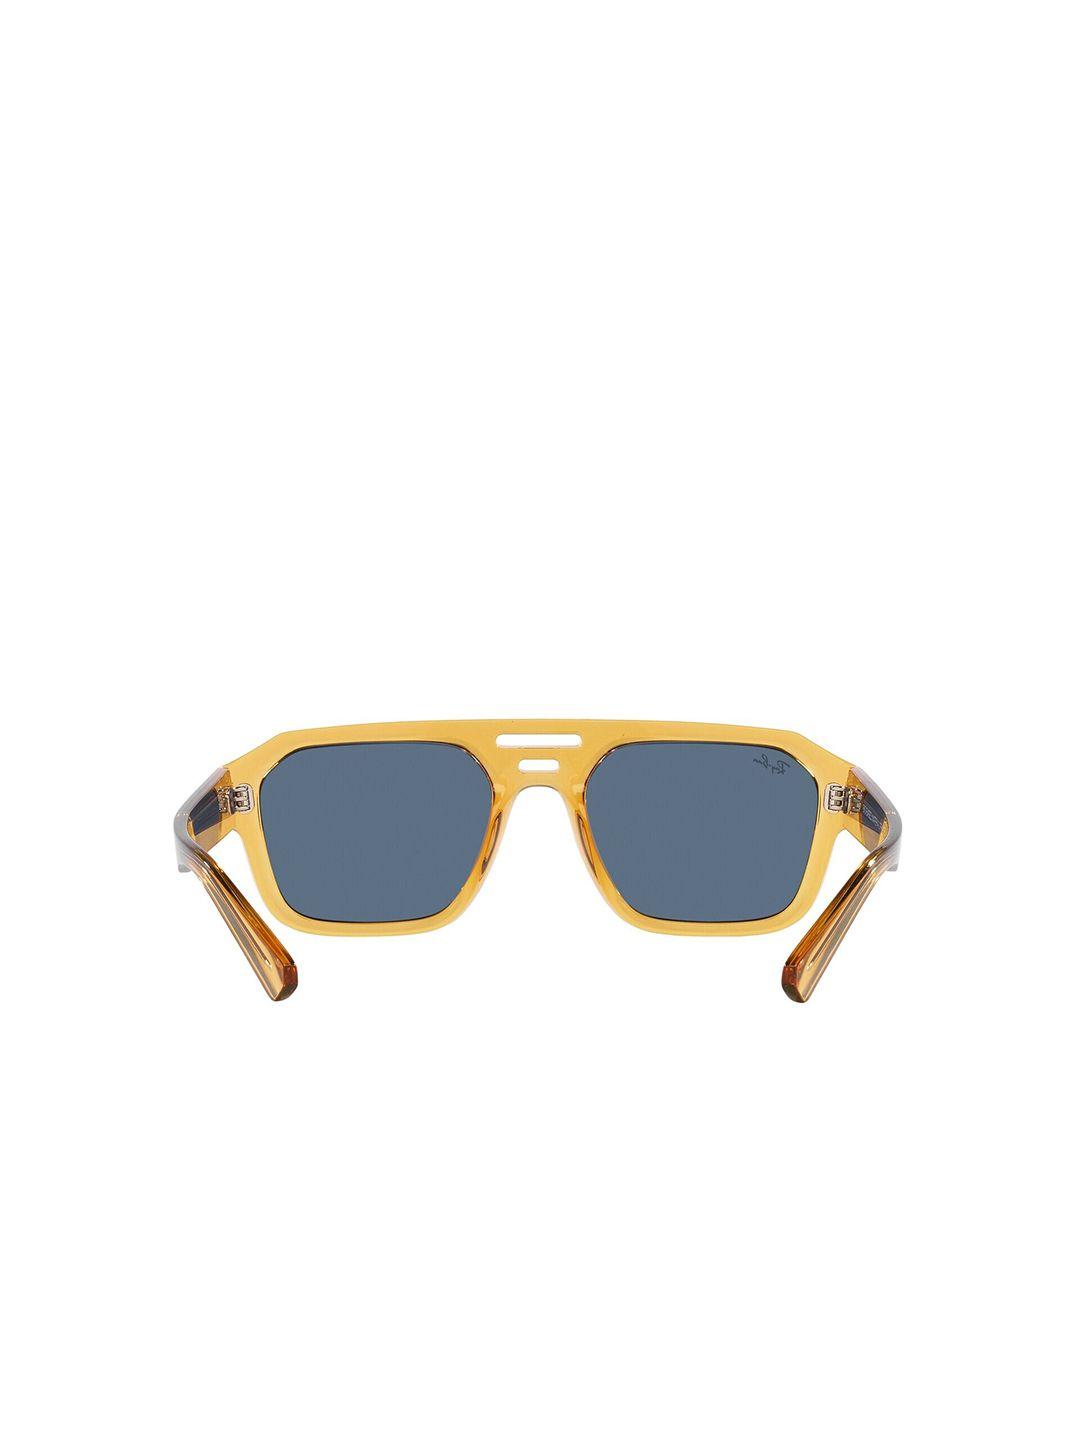 ray-ban other sunglasses with uv protected lens 8056597829557-transparent yellow